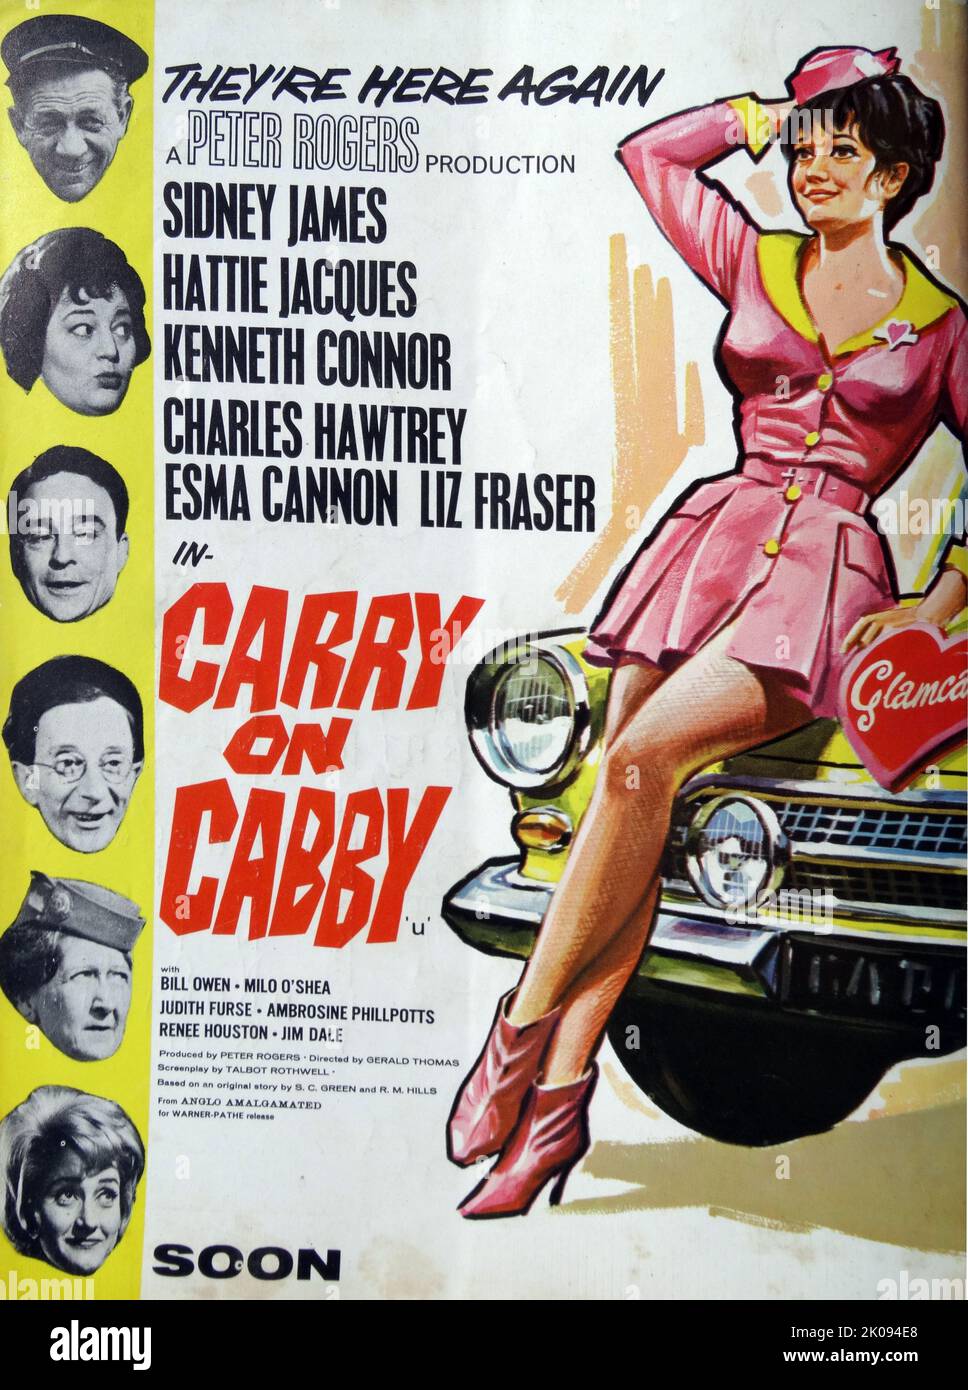 Poster advertising 1963 film Carry On Cabby, starring Sid James, Hattie Jacques, Kenneth Connor and Charles Hawtrey. Stock Photo